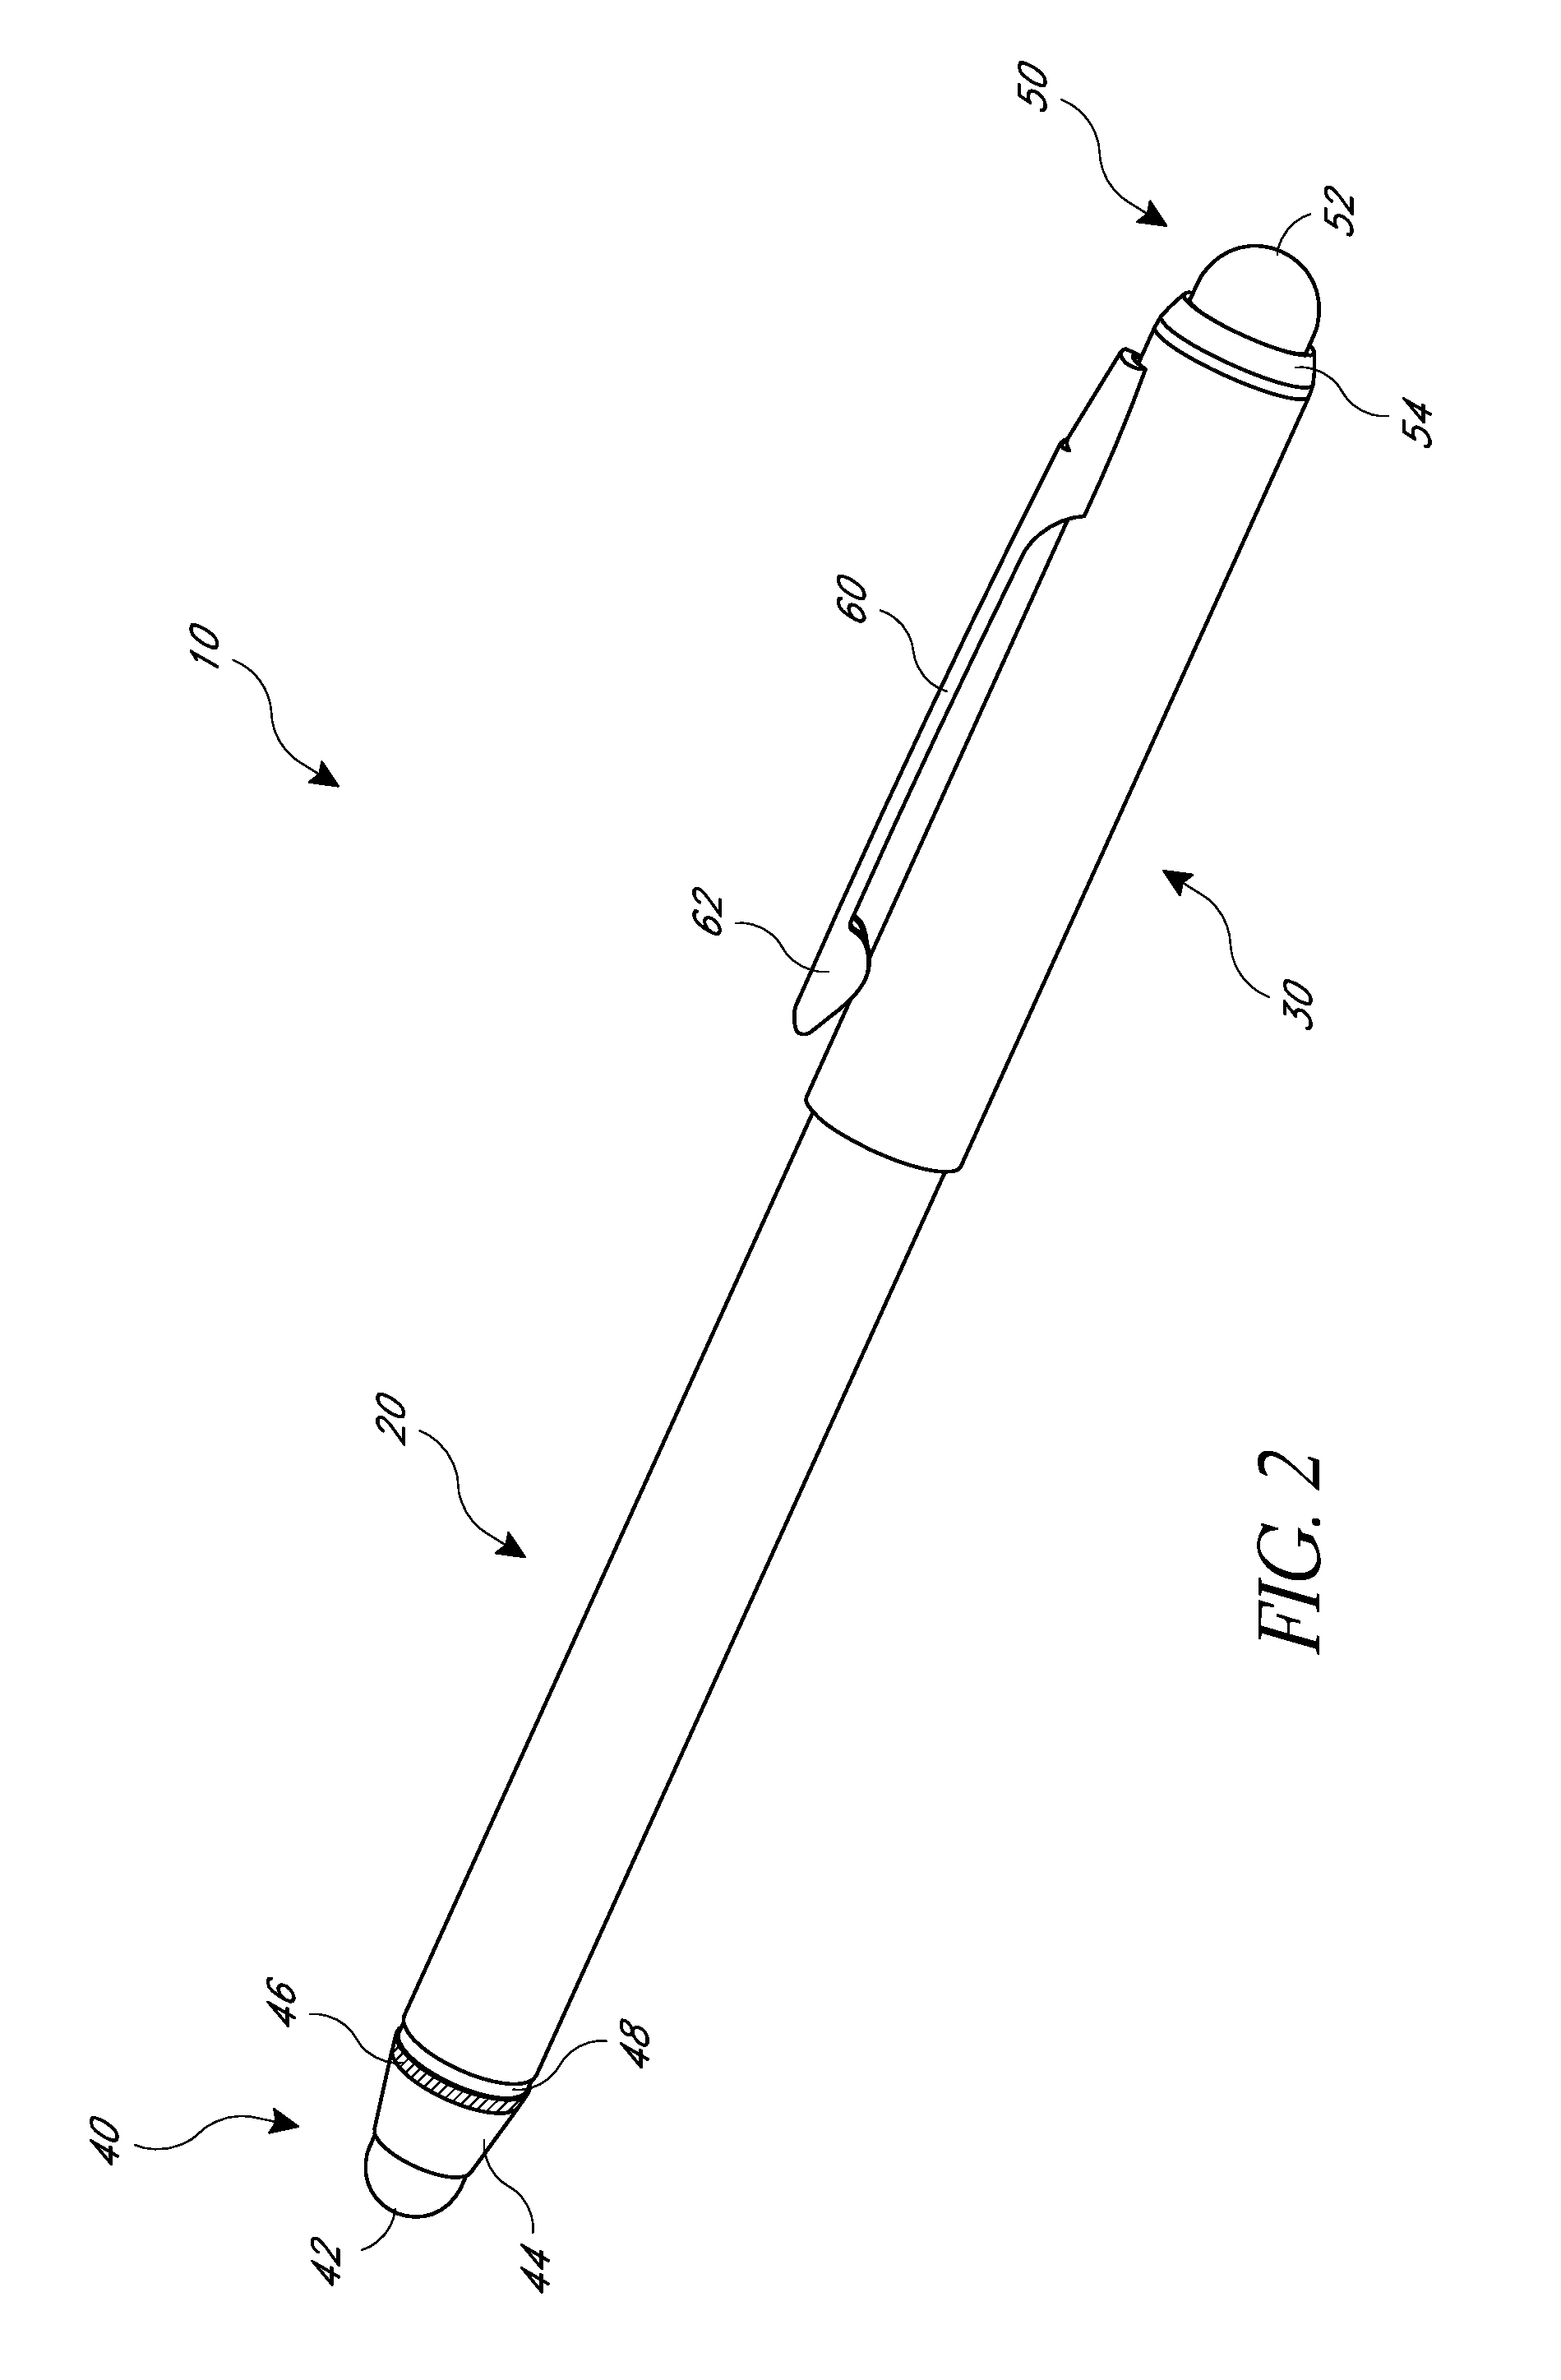 Multi-tip stylus pen for touch screen devices